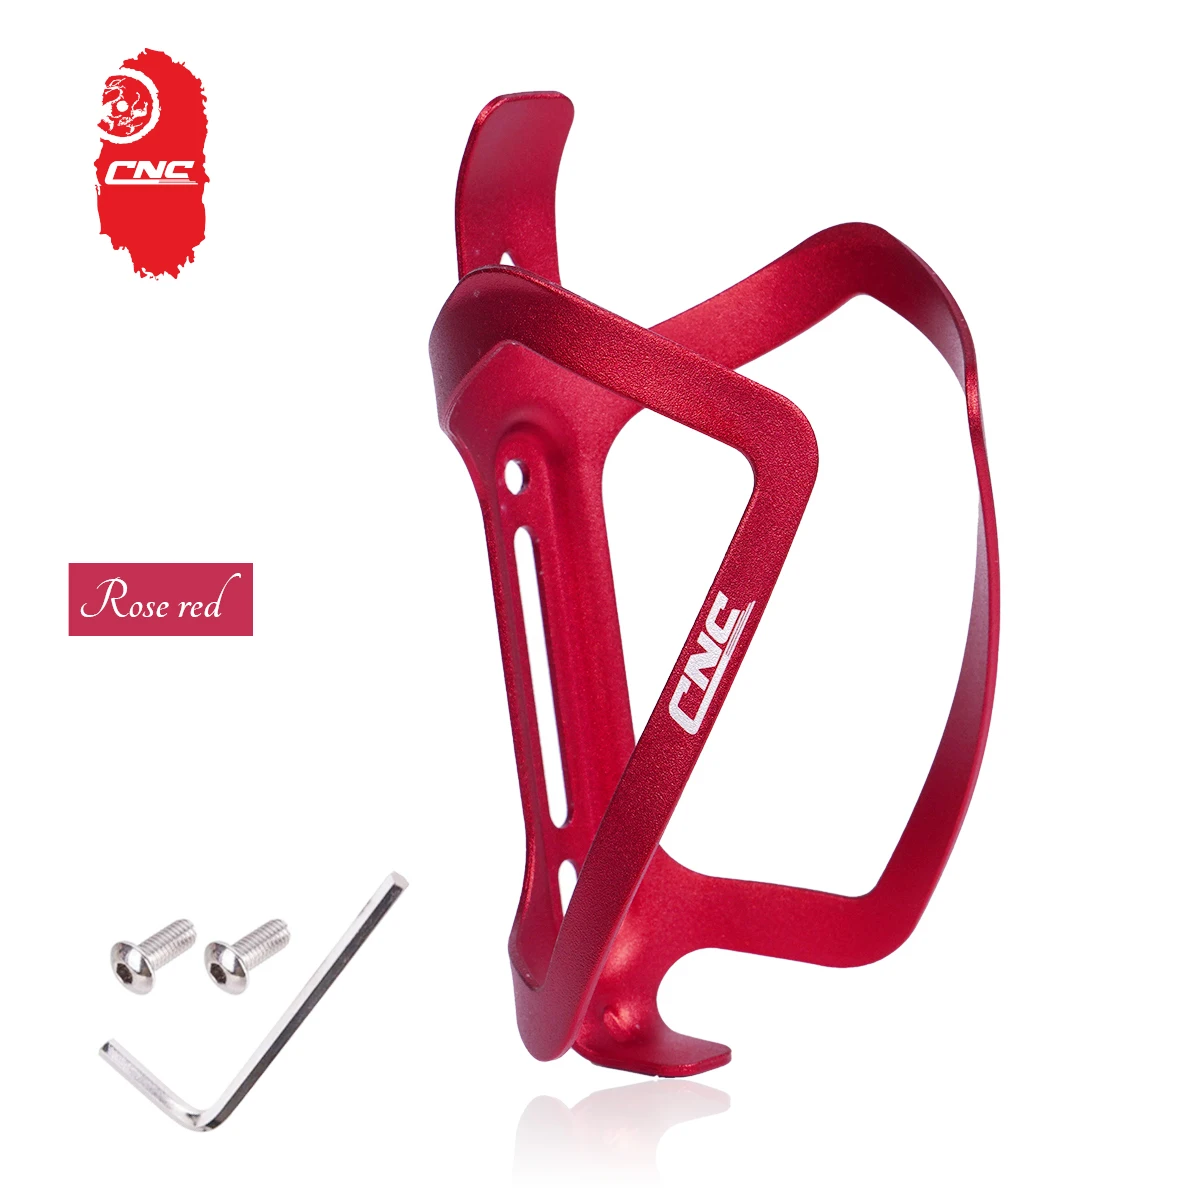 CNC Bicycle Water Bottle Cage, Aluminum alloy Lightweight Road/Mountain Bike Water Bottle Holder,